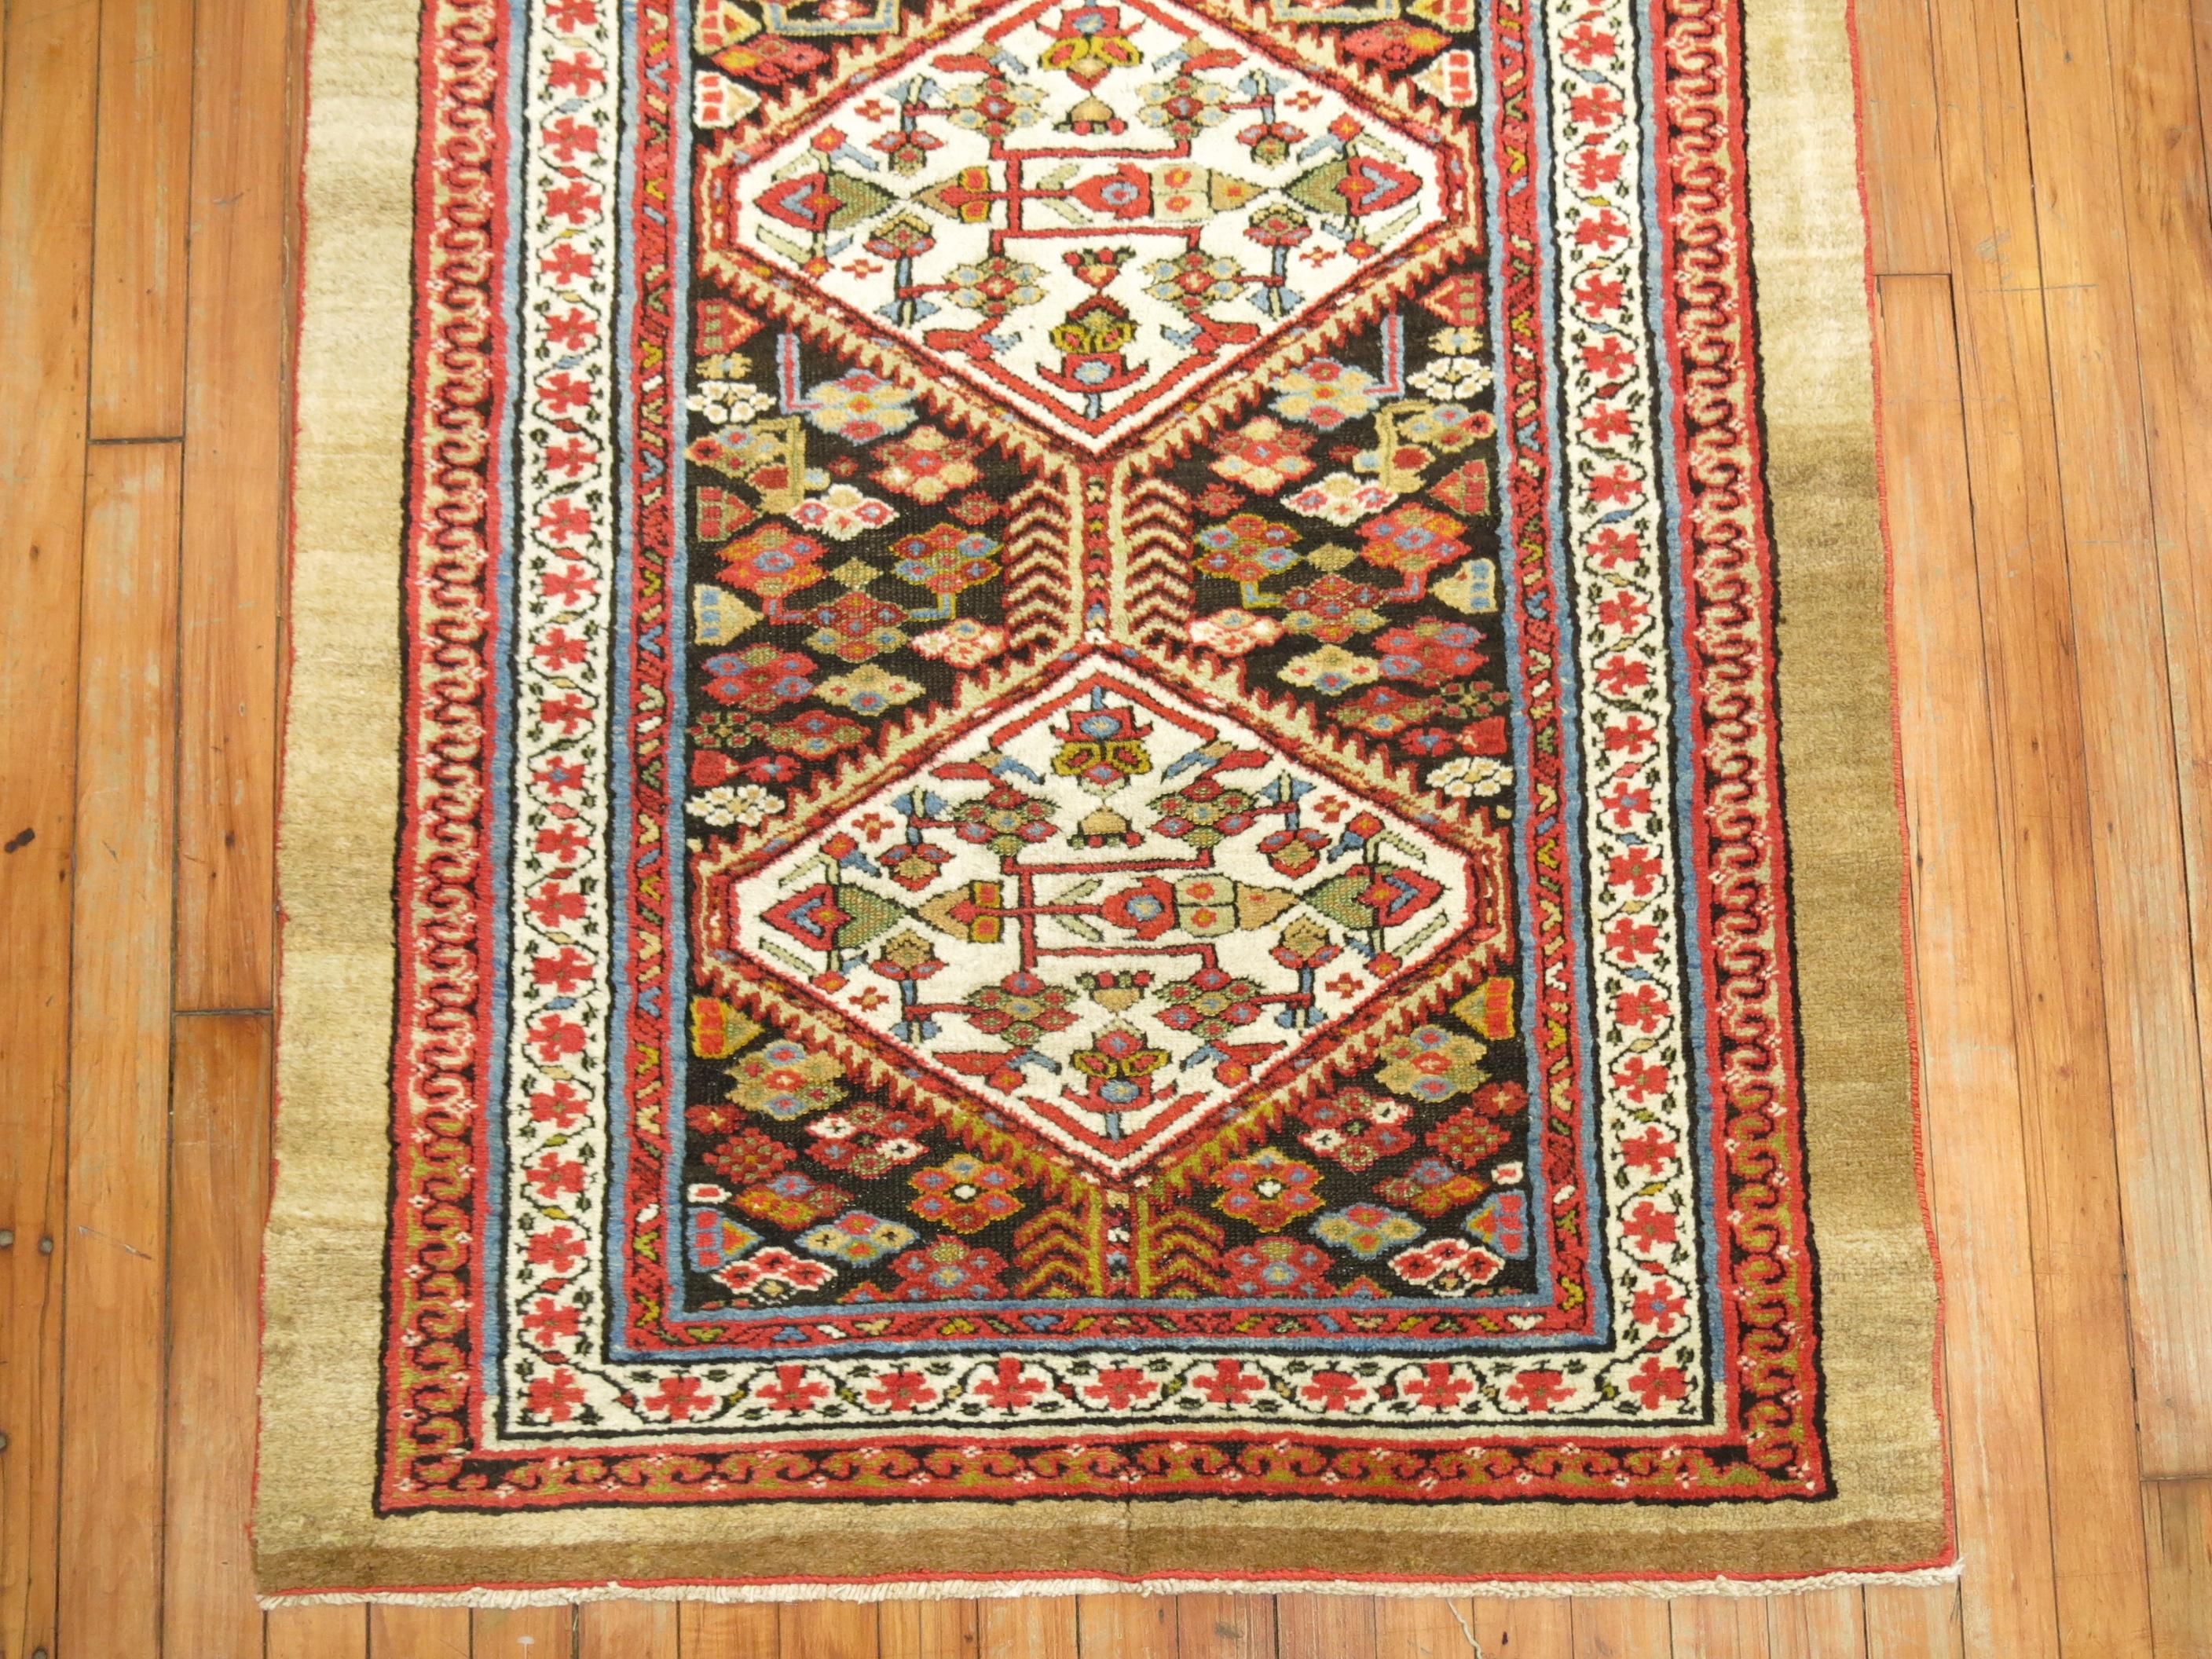 An early 20th century tribal highly decorative Persian Serab runner. Great quality and great condition.

Measures: 3'2